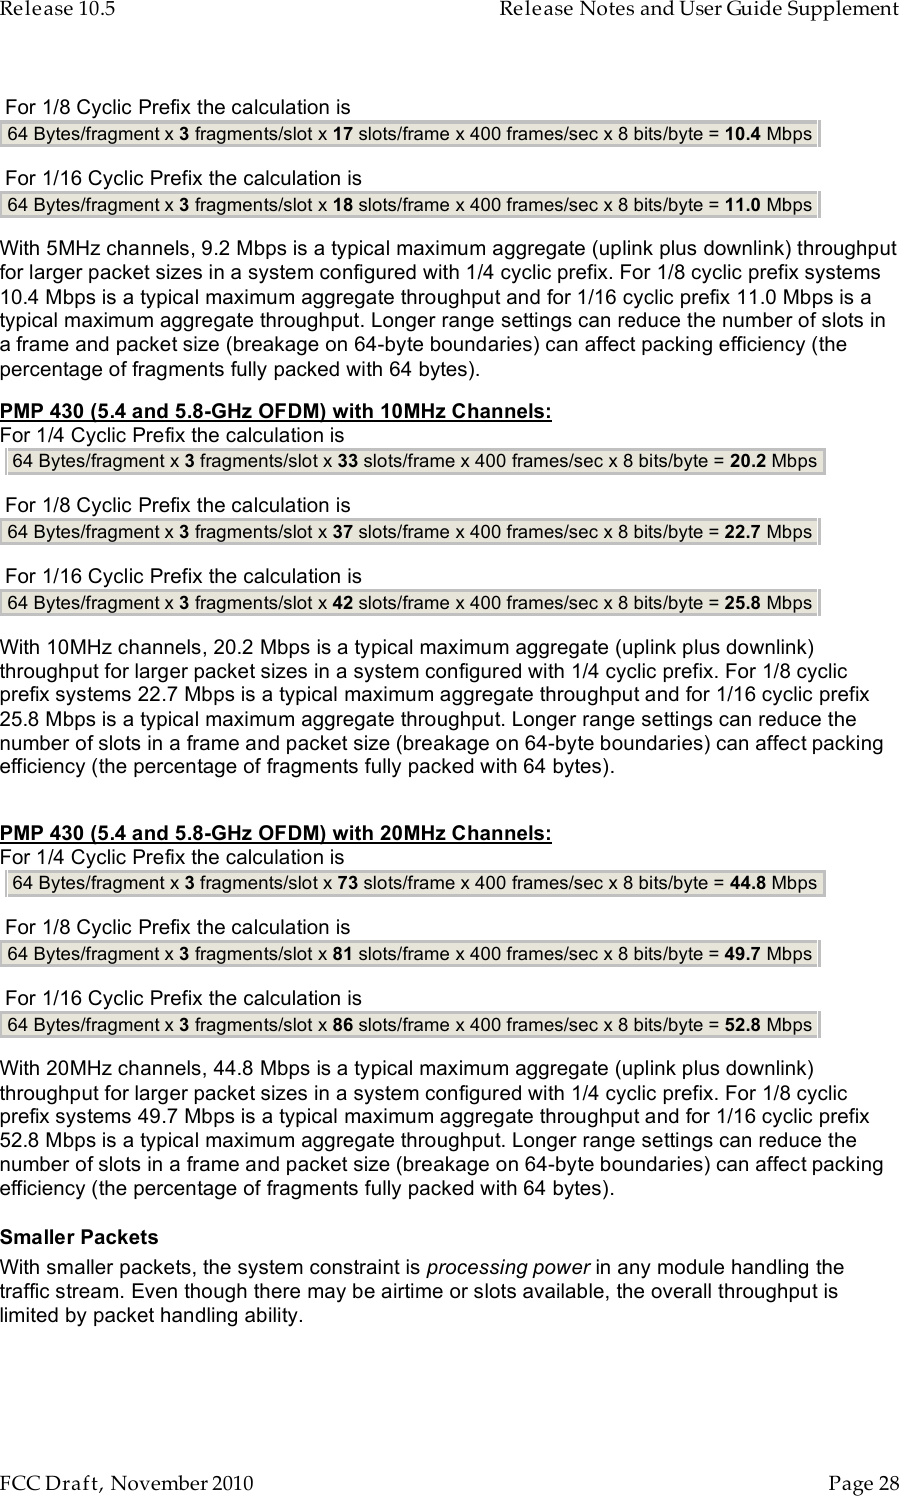 Release 10.5    Release Notes and User Guide Supplement      FCC Draft, November 2010  Page 28    For 1/8 Cyclic Prefix the calculation is   64 Bytes/fragment x 3 fragments/slot x 17 slots/frame x 400 frames/sec x 8 bits/byte = 10.4 Mbps    For 1/16 Cyclic Prefix the calculation is  64 Bytes/fragment x 3 fragments/slot x 18 slots/frame x 400 frames/sec x 8 bits/byte = 11.0 Mbps   With 5MHz channels, 9.2 Mbps is a typical maximum aggregate (uplink plus downlink) throughput for larger packet sizes in a system configured with 1/4 cyclic prefix. For 1/8 cyclic prefix systems 10.4 Mbps is a typical maximum aggregate throughput and for 1/16 cyclic prefix 11.0 Mbps is a typical maximum aggregate throughput. Longer range settings can reduce the number of slots in a frame and packet size (breakage on 64-byte boundaries) can affect packing efficiency (the percentage of fragments fully packed with 64 bytes). PMP 430 (5.4 and 5.8-GHz OFDM) with 10MHz Channels: For 1/4 Cyclic Prefix the calculation is    64 Bytes/fragment x 3 fragments/slot x 33 slots/frame x 400 frames/sec x 8 bits/byte = 20.2 Mbps    For 1/8 Cyclic Prefix the calculation is   64 Bytes/fragment x 3 fragments/slot x 37 slots/frame x 400 frames/sec x 8 bits/byte = 22.7 Mbps    For 1/16 Cyclic Prefix the calculation is  64 Bytes/fragment x 3 fragments/slot x 42 slots/frame x 400 frames/sec x 8 bits/byte = 25.8 Mbps   With 10MHz channels, 20.2 Mbps is a typical maximum aggregate (uplink plus downlink) throughput for larger packet sizes in a system configured with 1/4 cyclic prefix. For 1/8 cyclic prefix systems 22.7 Mbps is a typical maximum aggregate throughput and for 1/16 cyclic prefix 25.8 Mbps is a typical maximum aggregate throughput. Longer range settings can reduce the number of slots in a frame and packet size (breakage on 64-byte boundaries) can affect packing efficiency (the percentage of fragments fully packed with 64 bytes).  PMP 430 (5.4 and 5.8-GHz OFDM) with 20MHz Channels: For 1/4 Cyclic Prefix the calculation is    64 Bytes/fragment x 3 fragments/slot x 73 slots/frame x 400 frames/sec x 8 bits/byte = 44.8 Mbps    For 1/8 Cyclic Prefix the calculation is   64 Bytes/fragment x 3 fragments/slot x 81 slots/frame x 400 frames/sec x 8 bits/byte = 49.7 Mbps    For 1/16 Cyclic Prefix the calculation is  64 Bytes/fragment x 3 fragments/slot x 86 slots/frame x 400 frames/sec x 8 bits/byte = 52.8 Mbps   With 20MHz channels, 44.8 Mbps is a typical maximum aggregate (uplink plus downlink) throughput for larger packet sizes in a system configured with 1/4 cyclic prefix. For 1/8 cyclic prefix systems 49.7 Mbps is a typical maximum aggregate throughput and for 1/16 cyclic prefix 52.8 Mbps is a typical maximum aggregate throughput. Longer range settings can reduce the number of slots in a frame and packet size (breakage on 64-byte boundaries) can affect packing efficiency (the percentage of fragments fully packed with 64 bytes). Smaller Packets With smaller packets, the system constraint is processing power in any module handling the traffic stream. Even though there may be airtime or slots available, the overall throughput is limited by packet handling ability.  